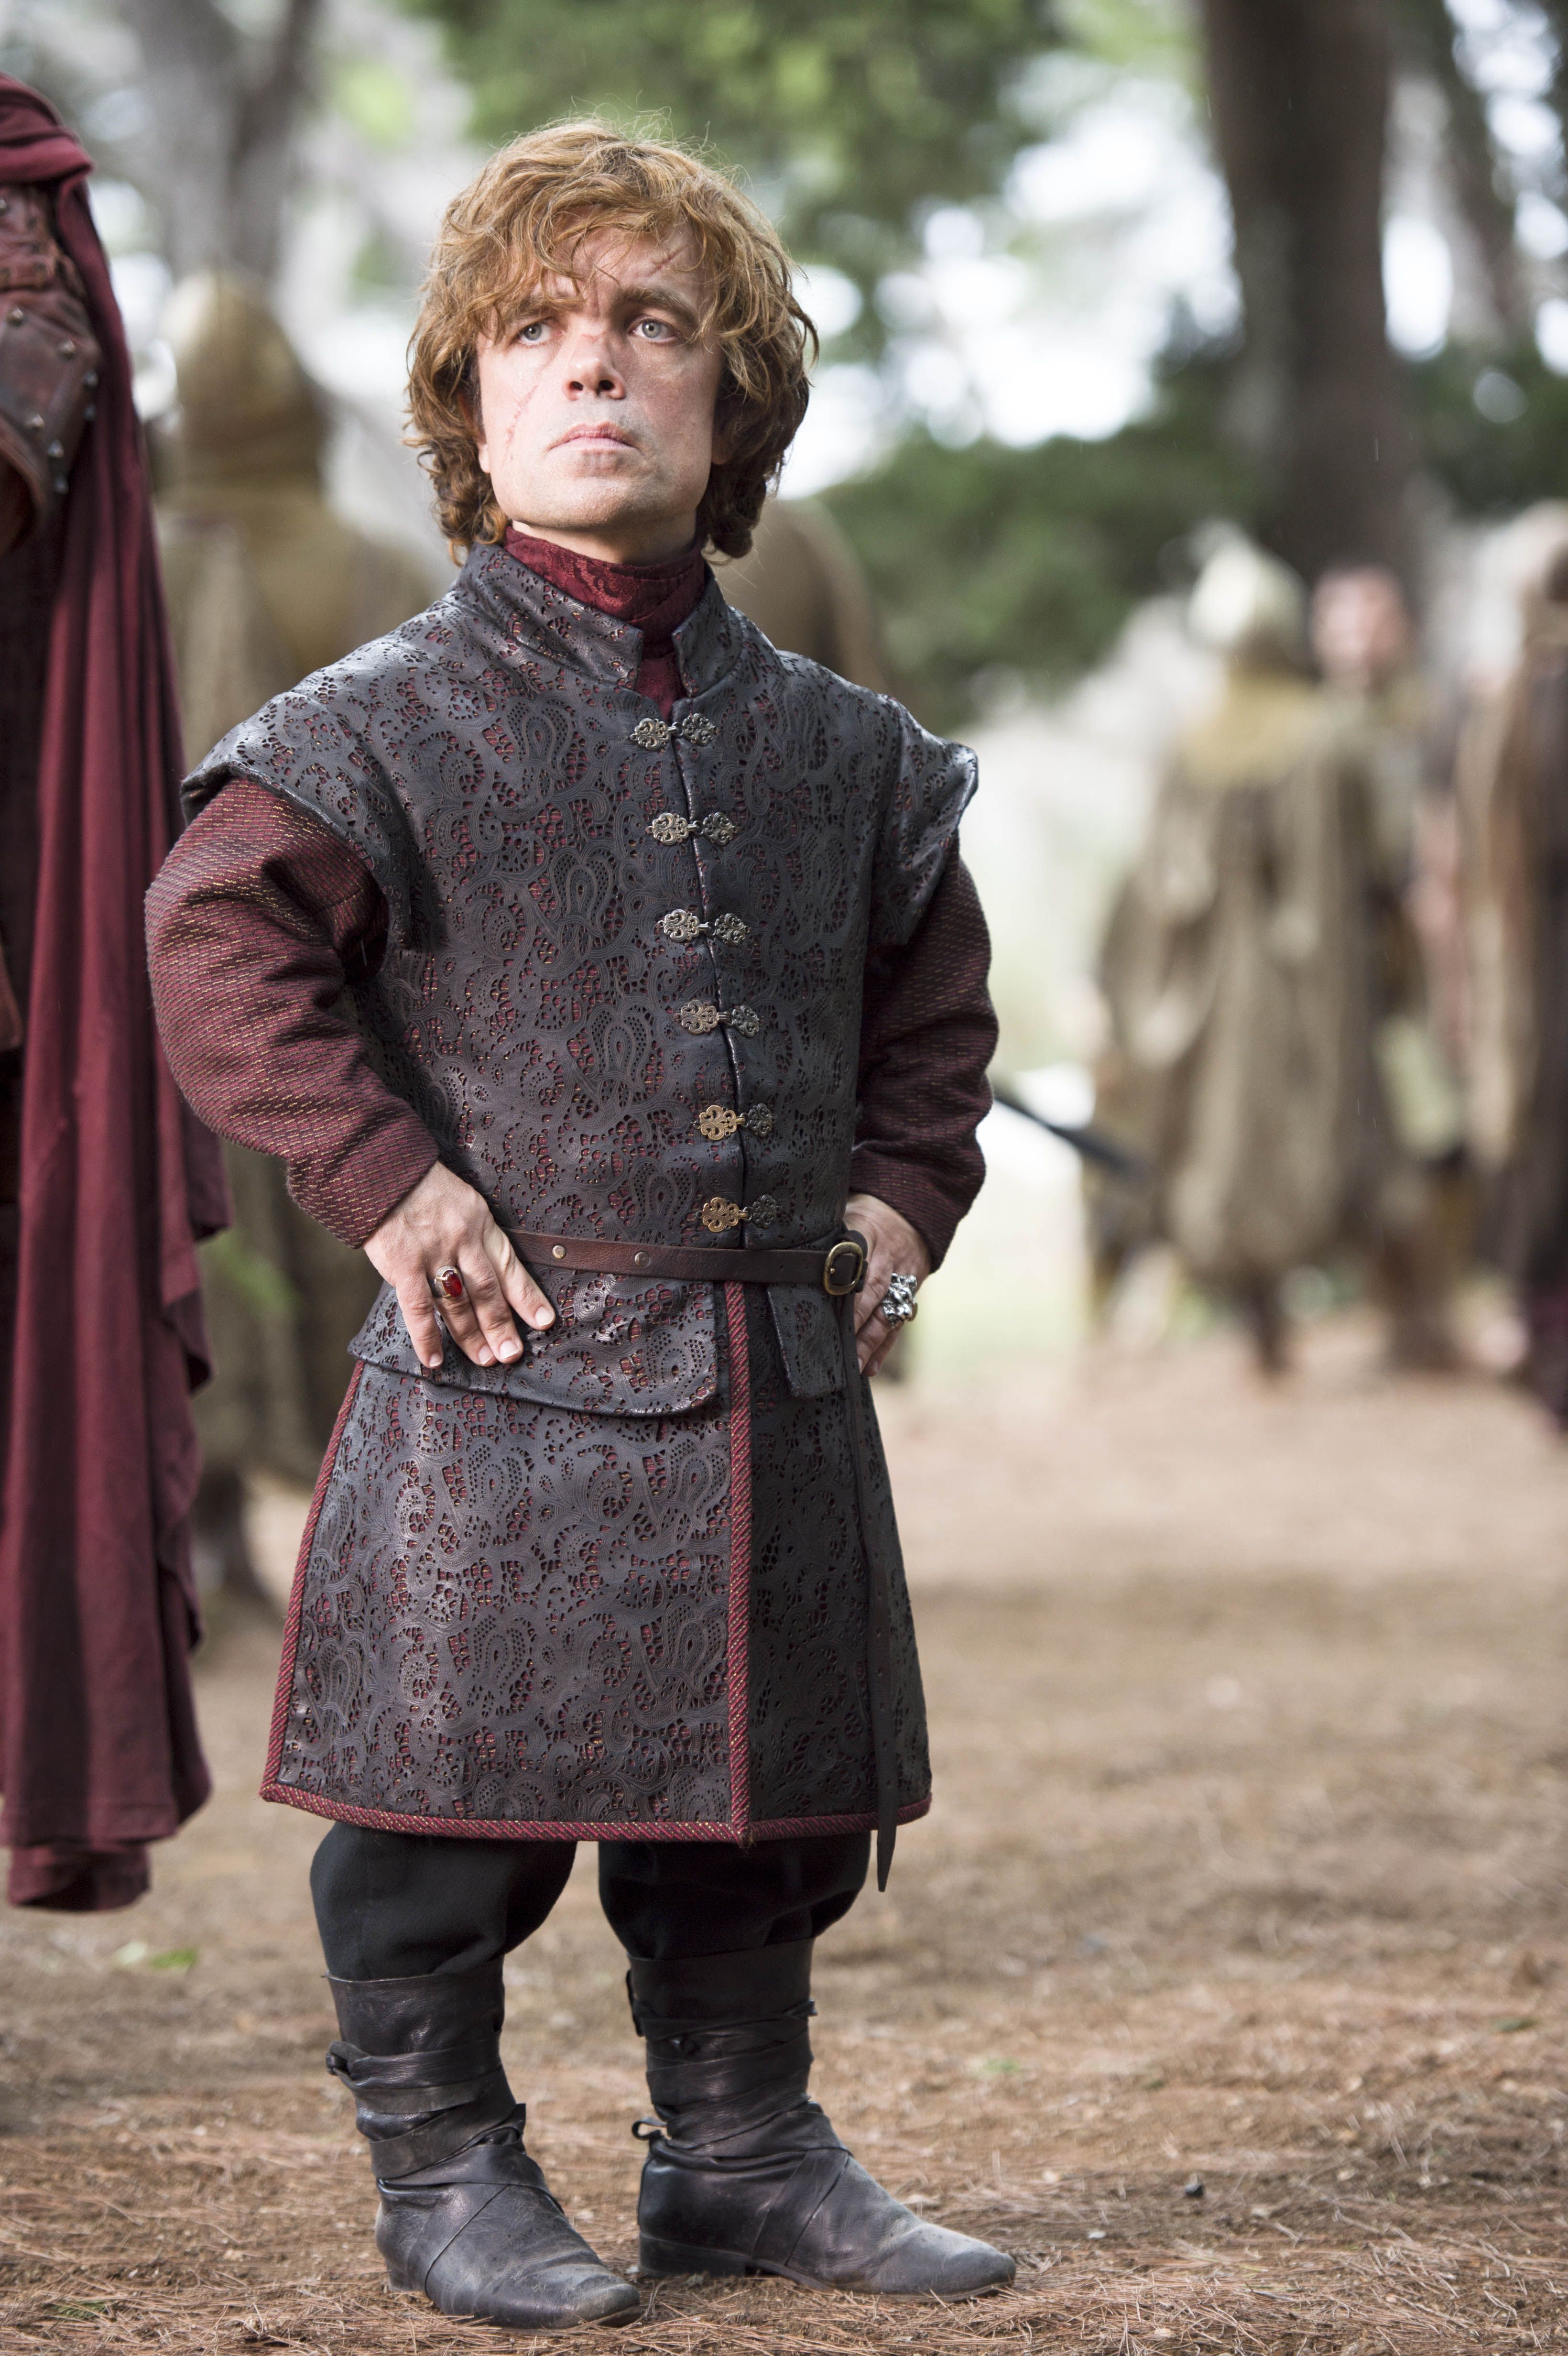 House Lannister image Tyrion Lannister HD wallpaper and background